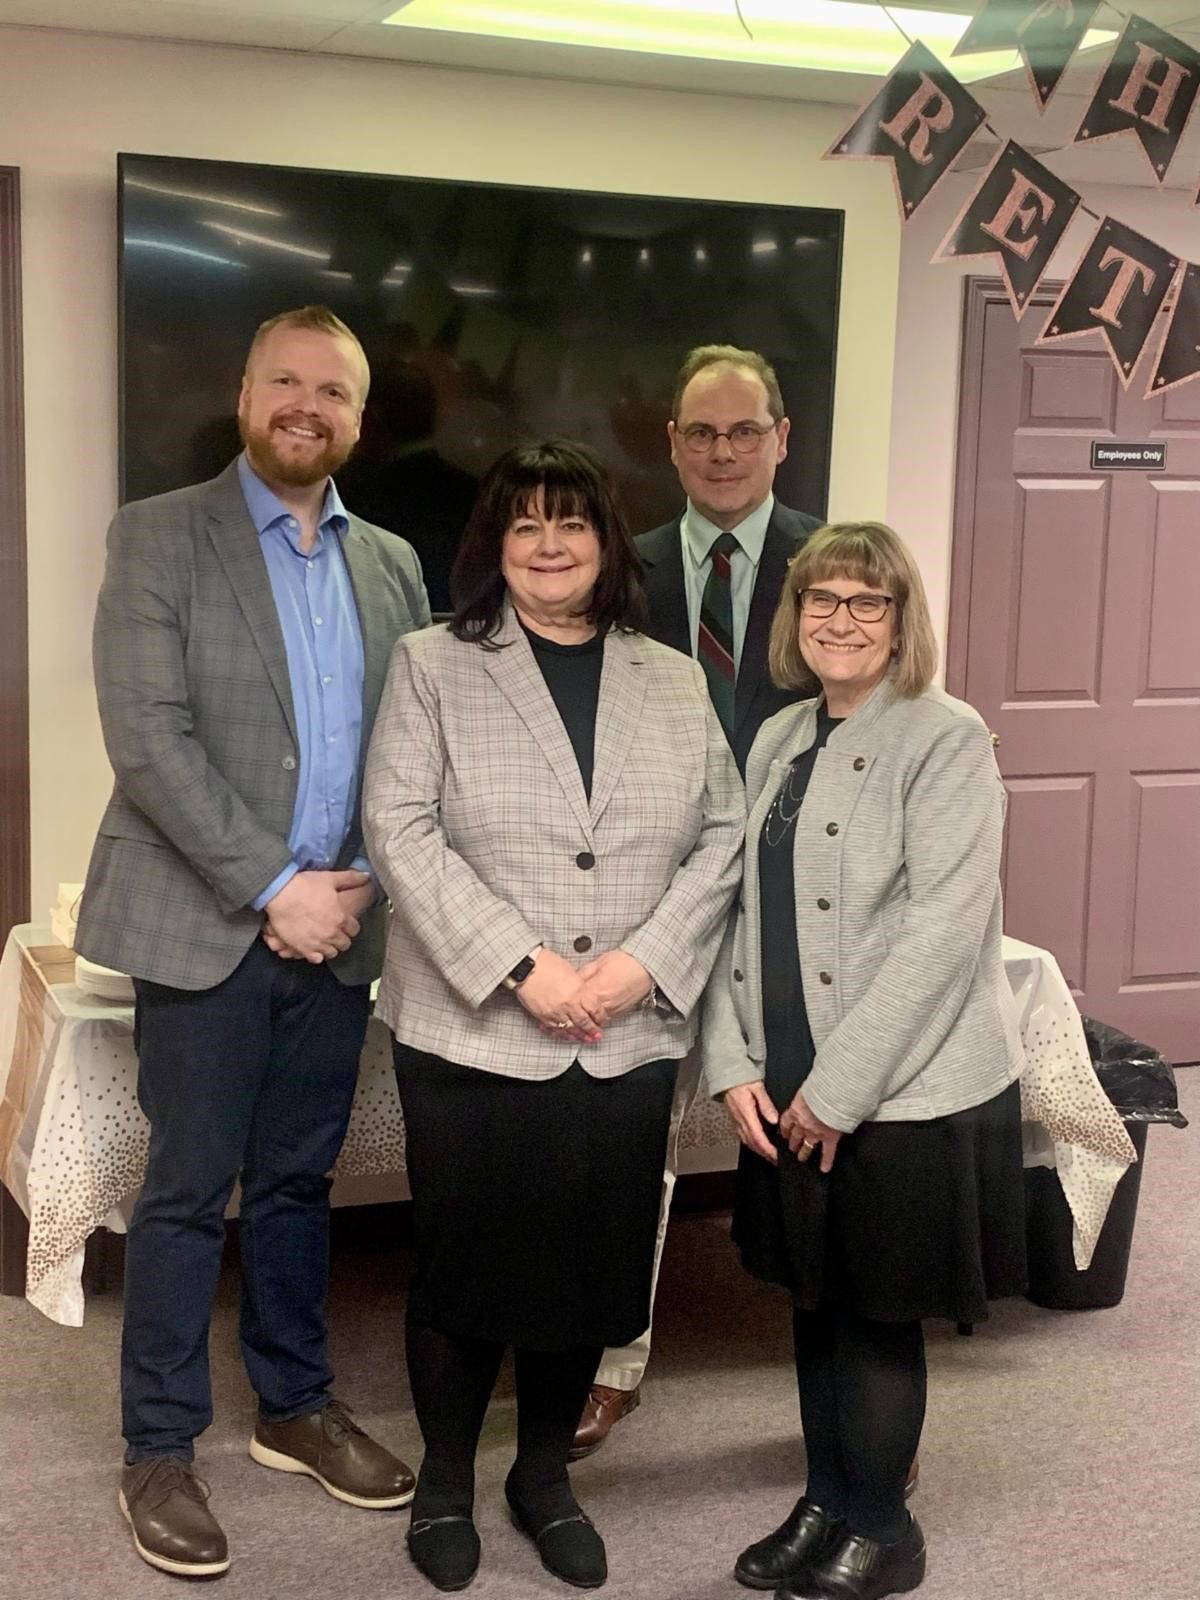 Pictured above left to right: Commissioners; Casey Kozlowski, Kathryn Whittington, and J.P. Ducro. And Miriam Walton from Ashtabula County Mental Health and Recovery Services Board.